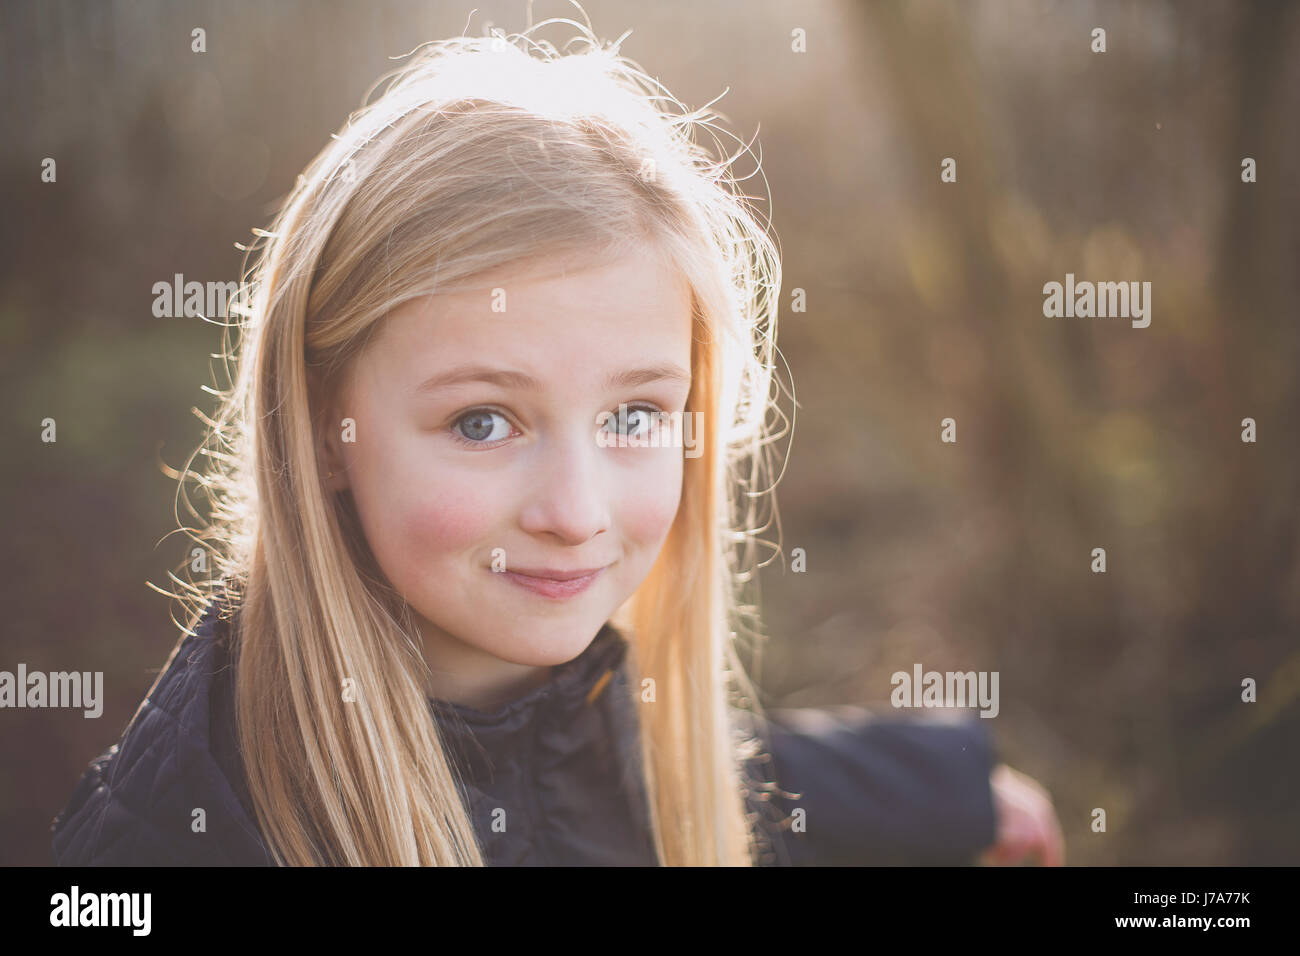 Portrait of a smiling girl outdoors Stock Photo